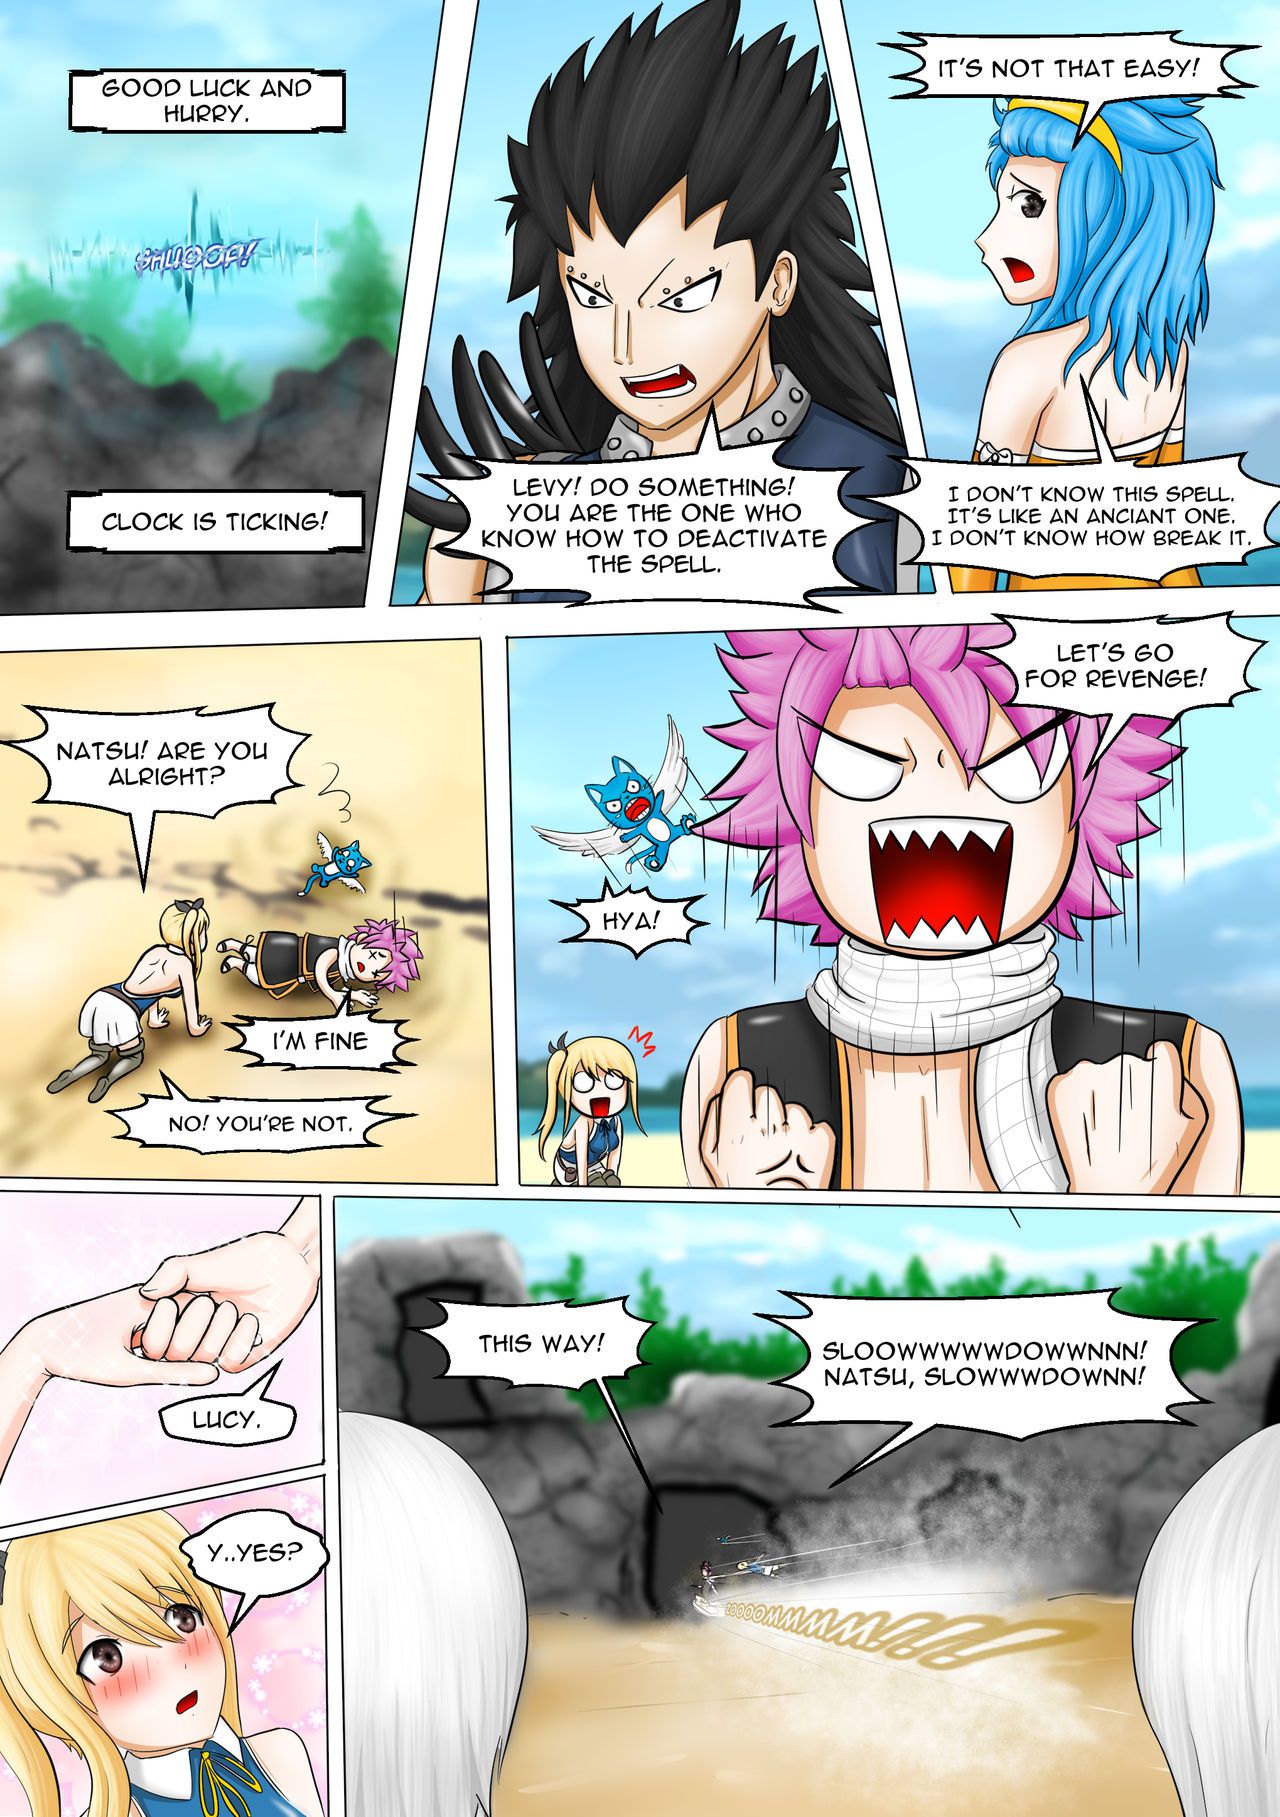 [EscapeFromExpansion] A Huger Game (Fairy Tail) [Ongoing] 12